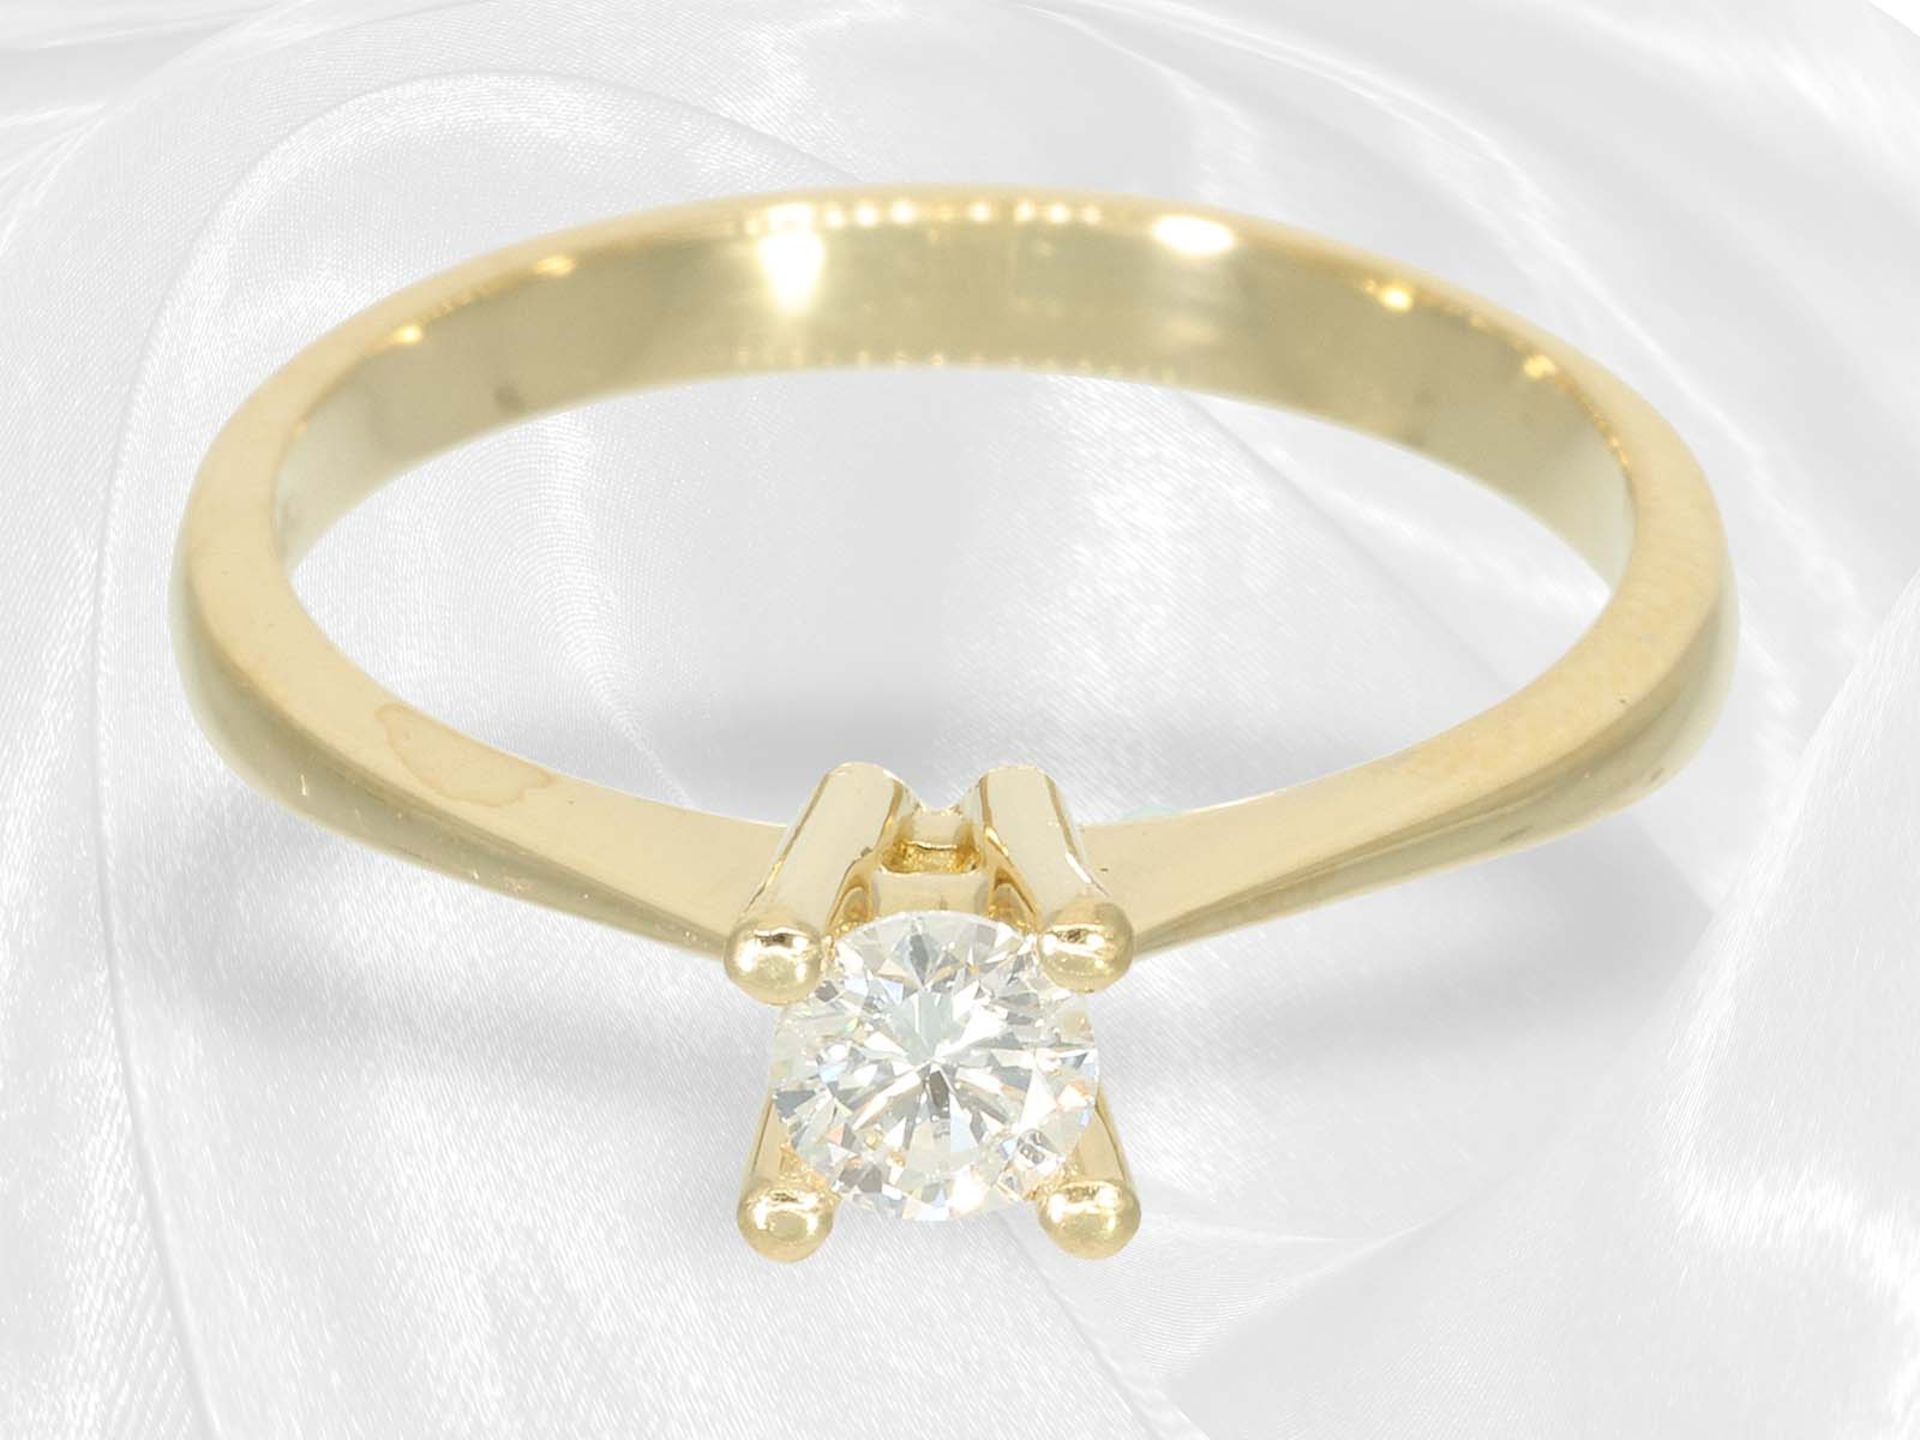 Ring: 18K gold solitaire/brilliant-cut diamond, approx. 0.3ct - Image 2 of 4